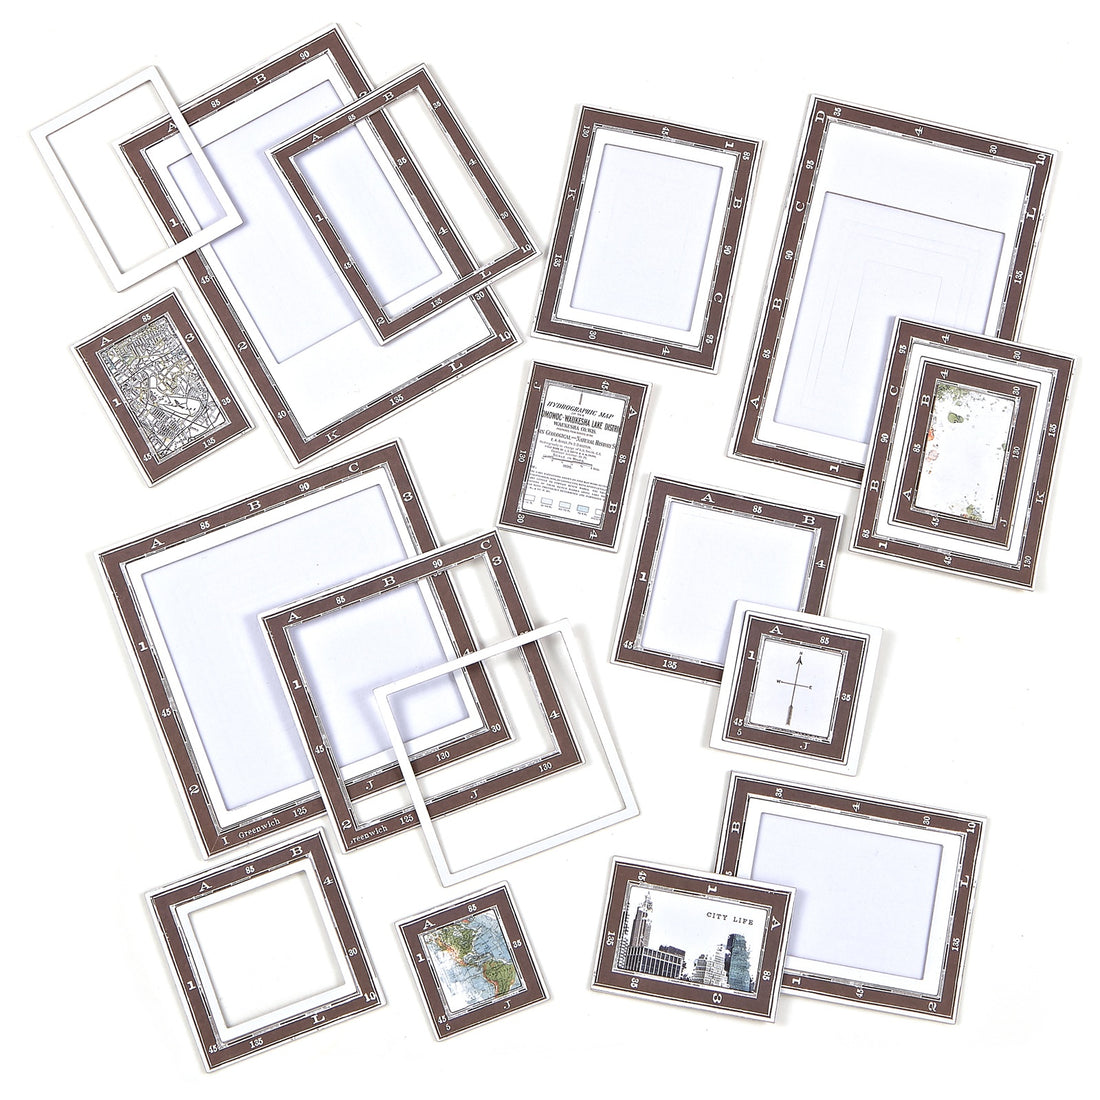 49 and Market WHEREVER CHIPBOARD FRAMES 16pc